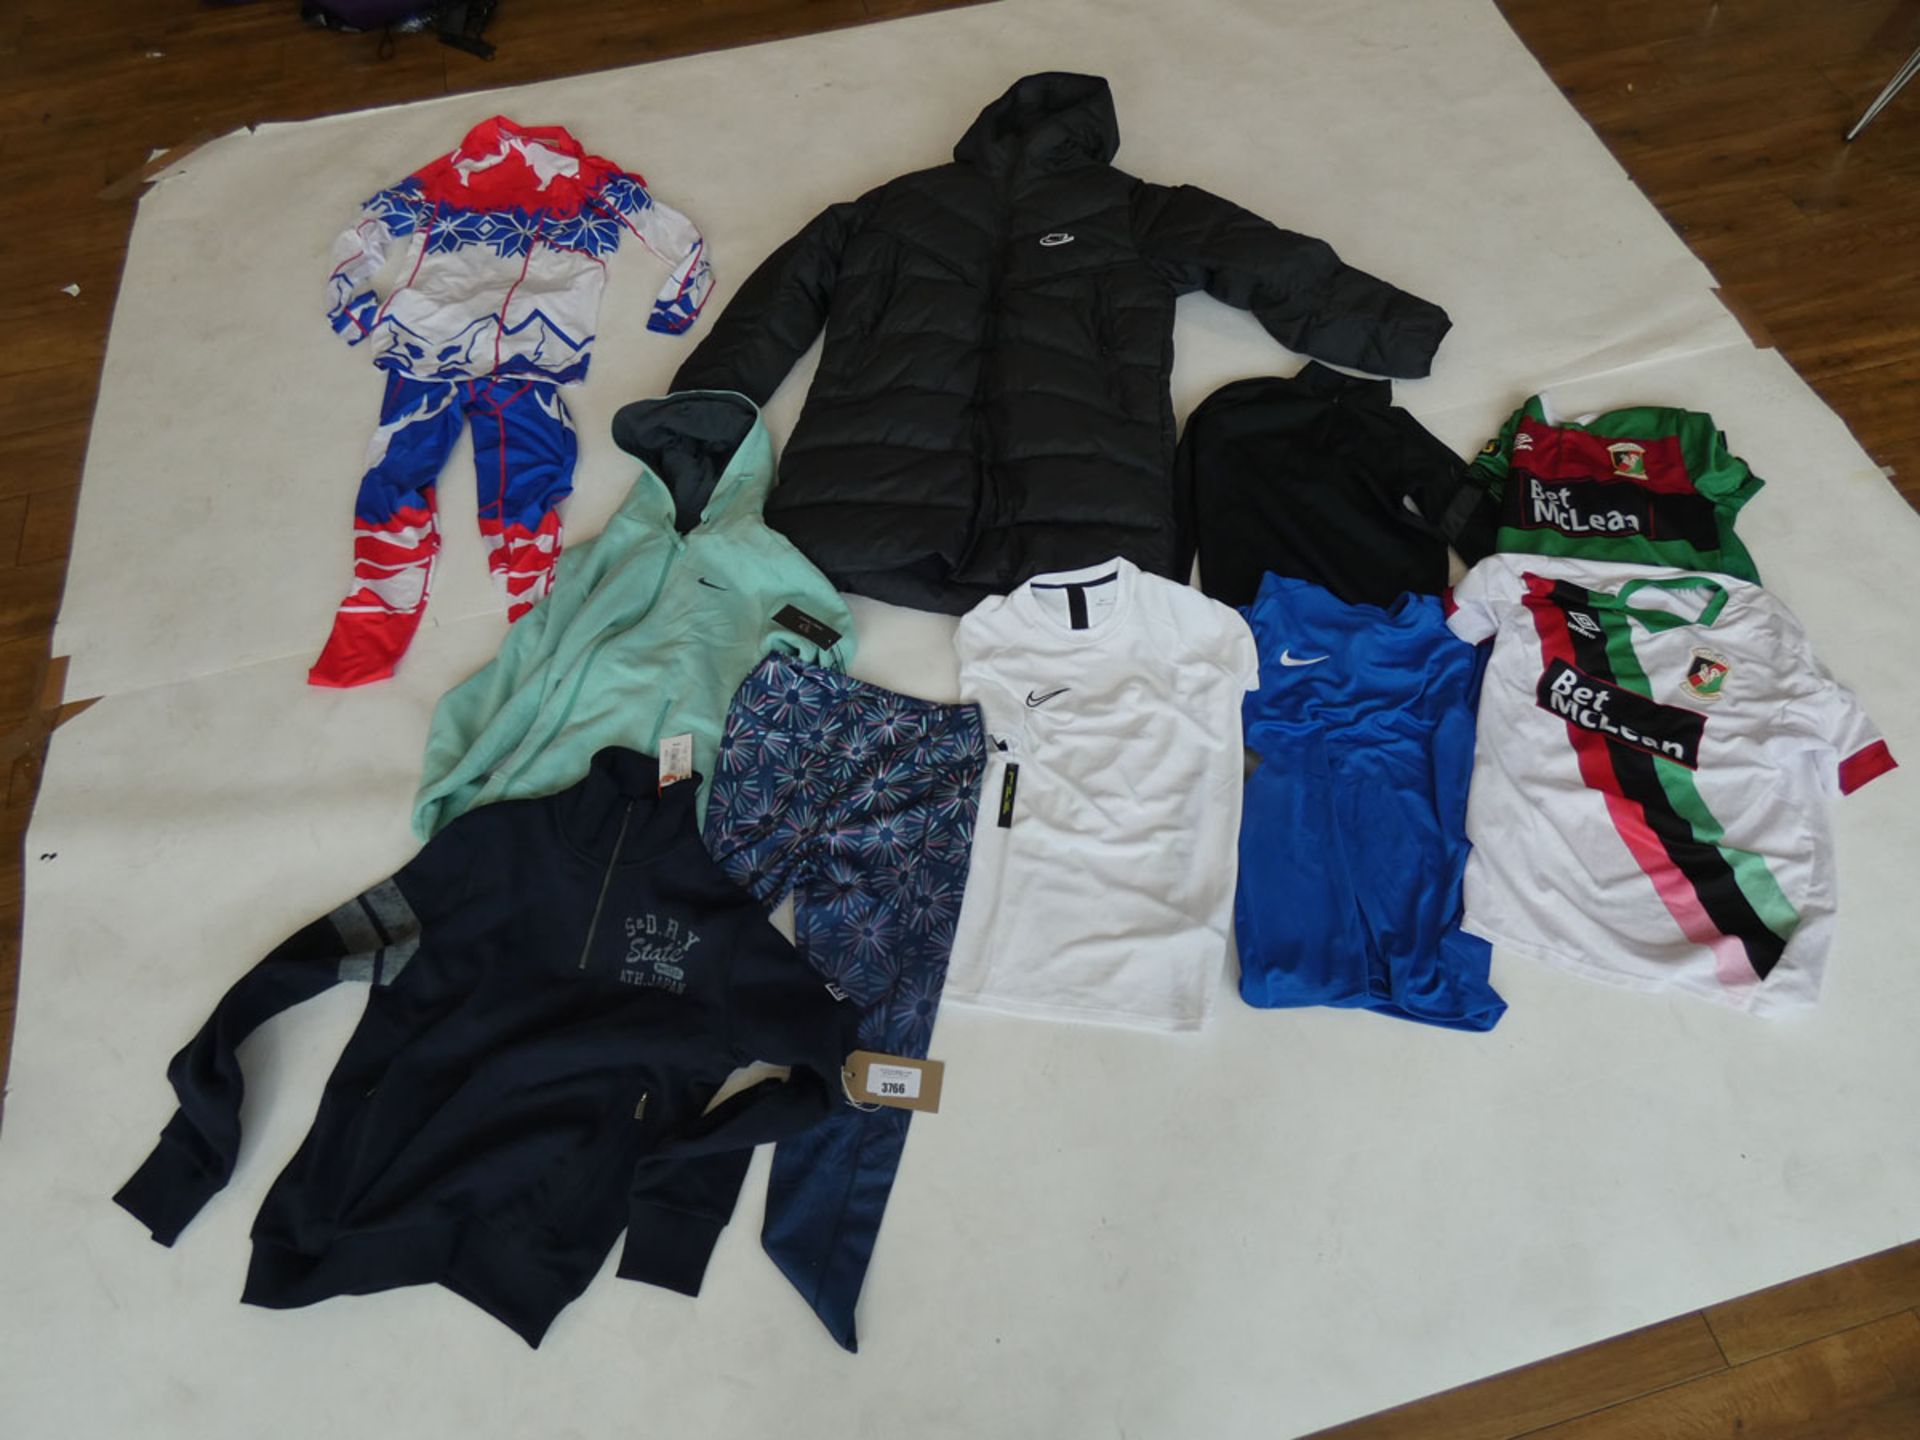 Selection of sportswear to include Nike, Superdry, Perky Peach, etc - in various sizes